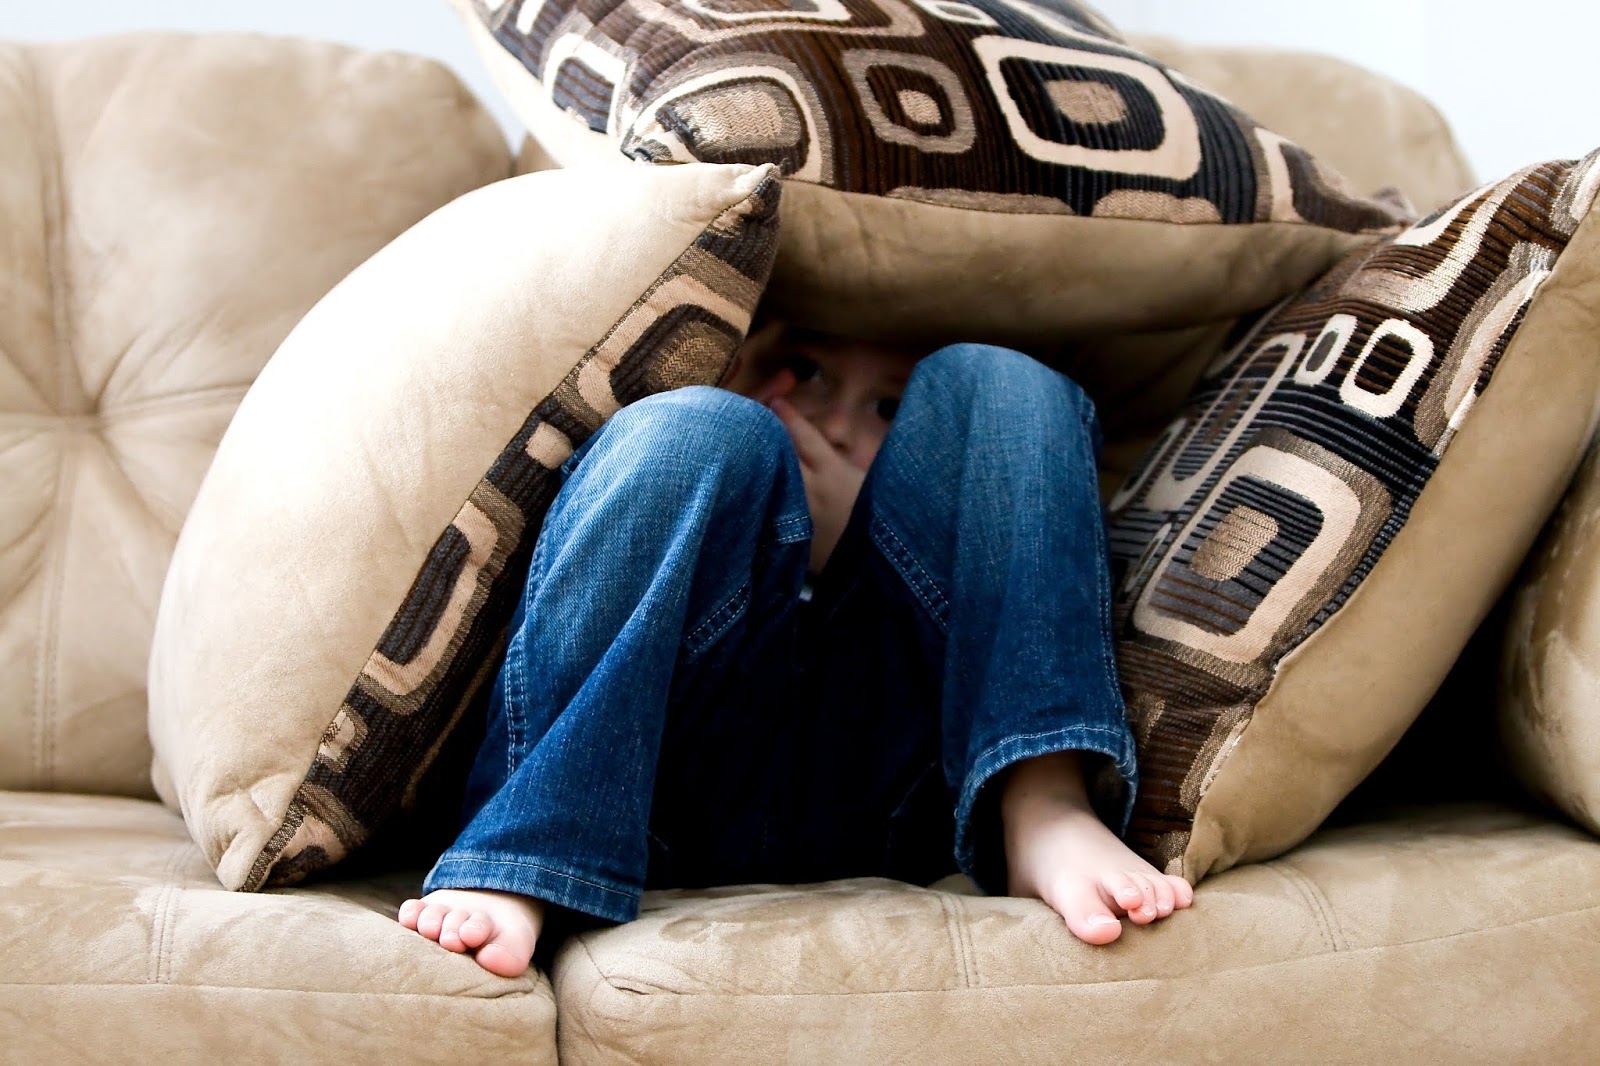 young boy in blue jeans hiding under a pile of cushions on a couch